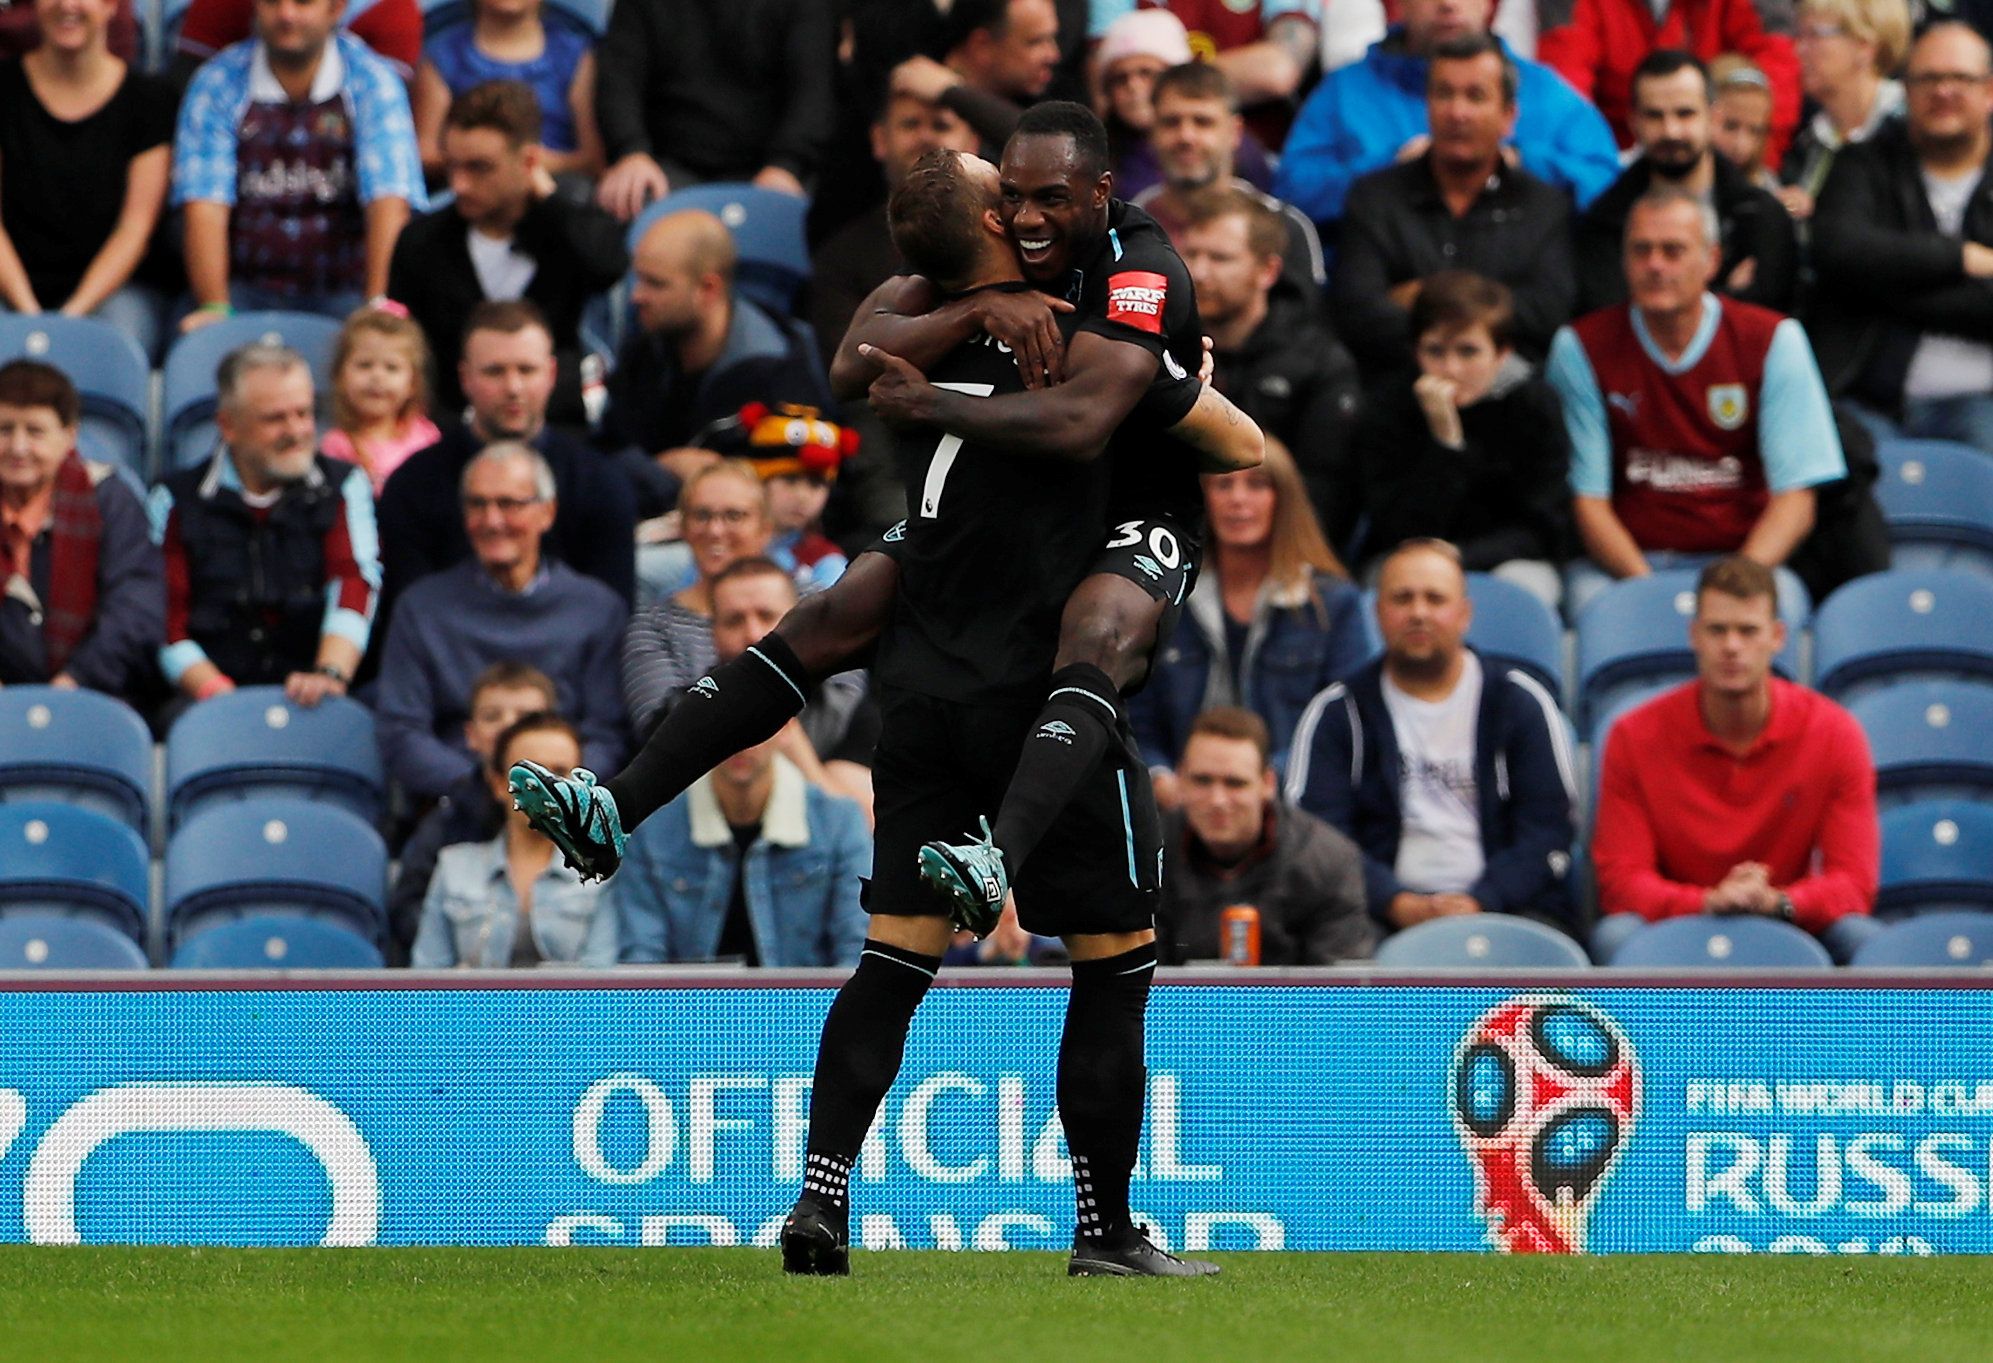 Soccer Football - Premier League - Burnley vs West Ham United - Turf Moor, Burnley, Britain - October 14, 2017   West Ham United's Michail Antonio celebrates scoring their first goal with Marko Arnautovic      Action Images via Reuters/Lee Smith    EDITORIAL USE ONLY. No use with unauthorized audio, video, data, fixture lists, club/league logos or 